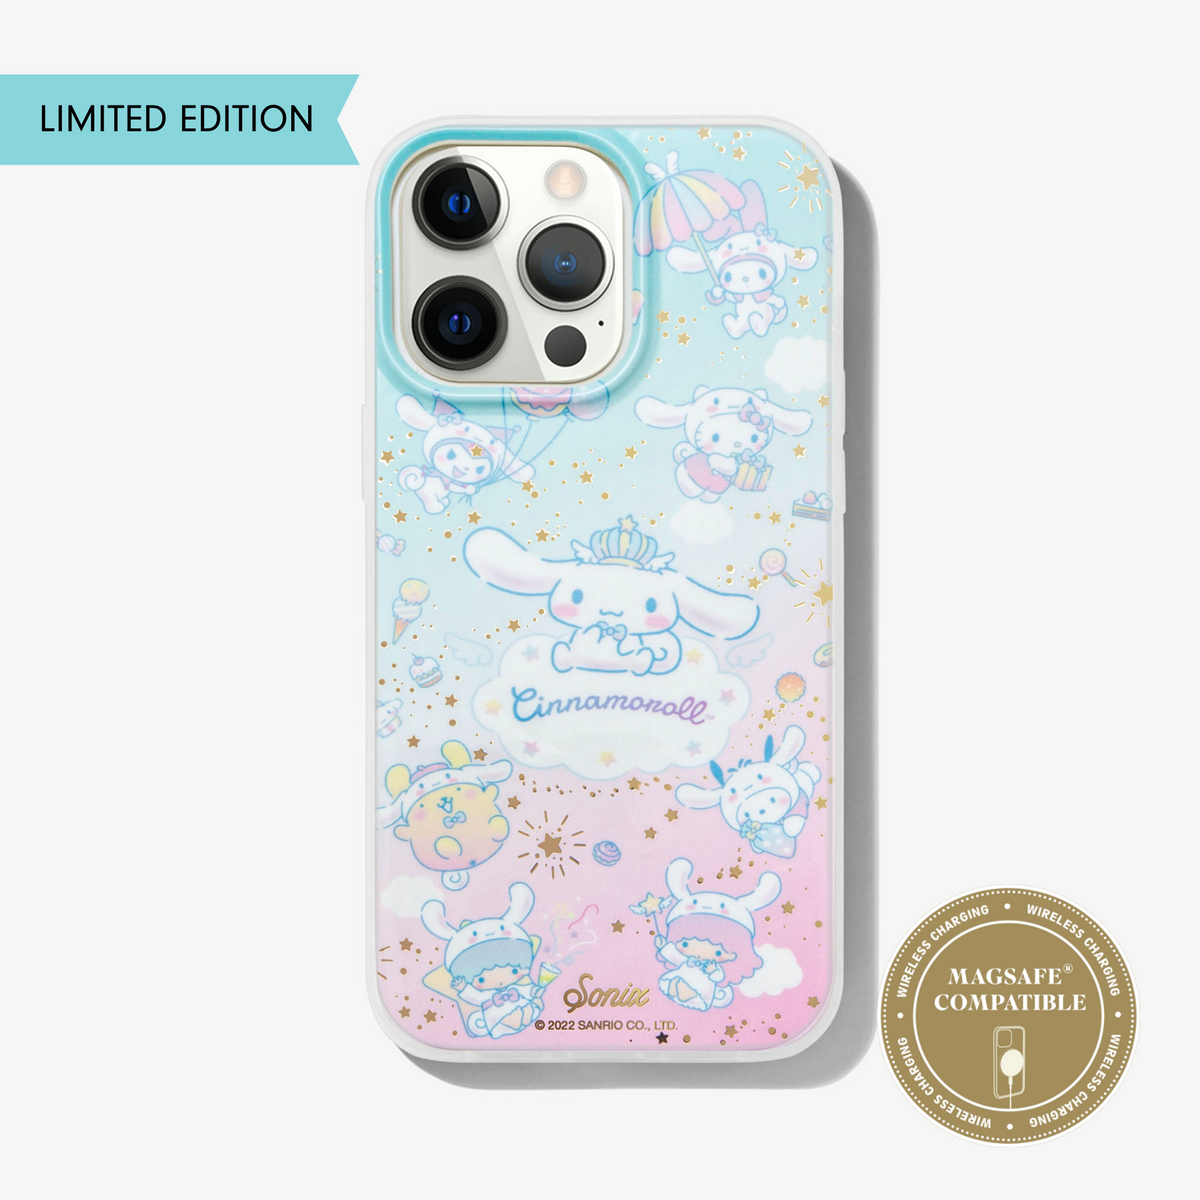 Cruisin' Hello Kitty MagSafe Compatible iPhone 12 Pro Case from Sonix